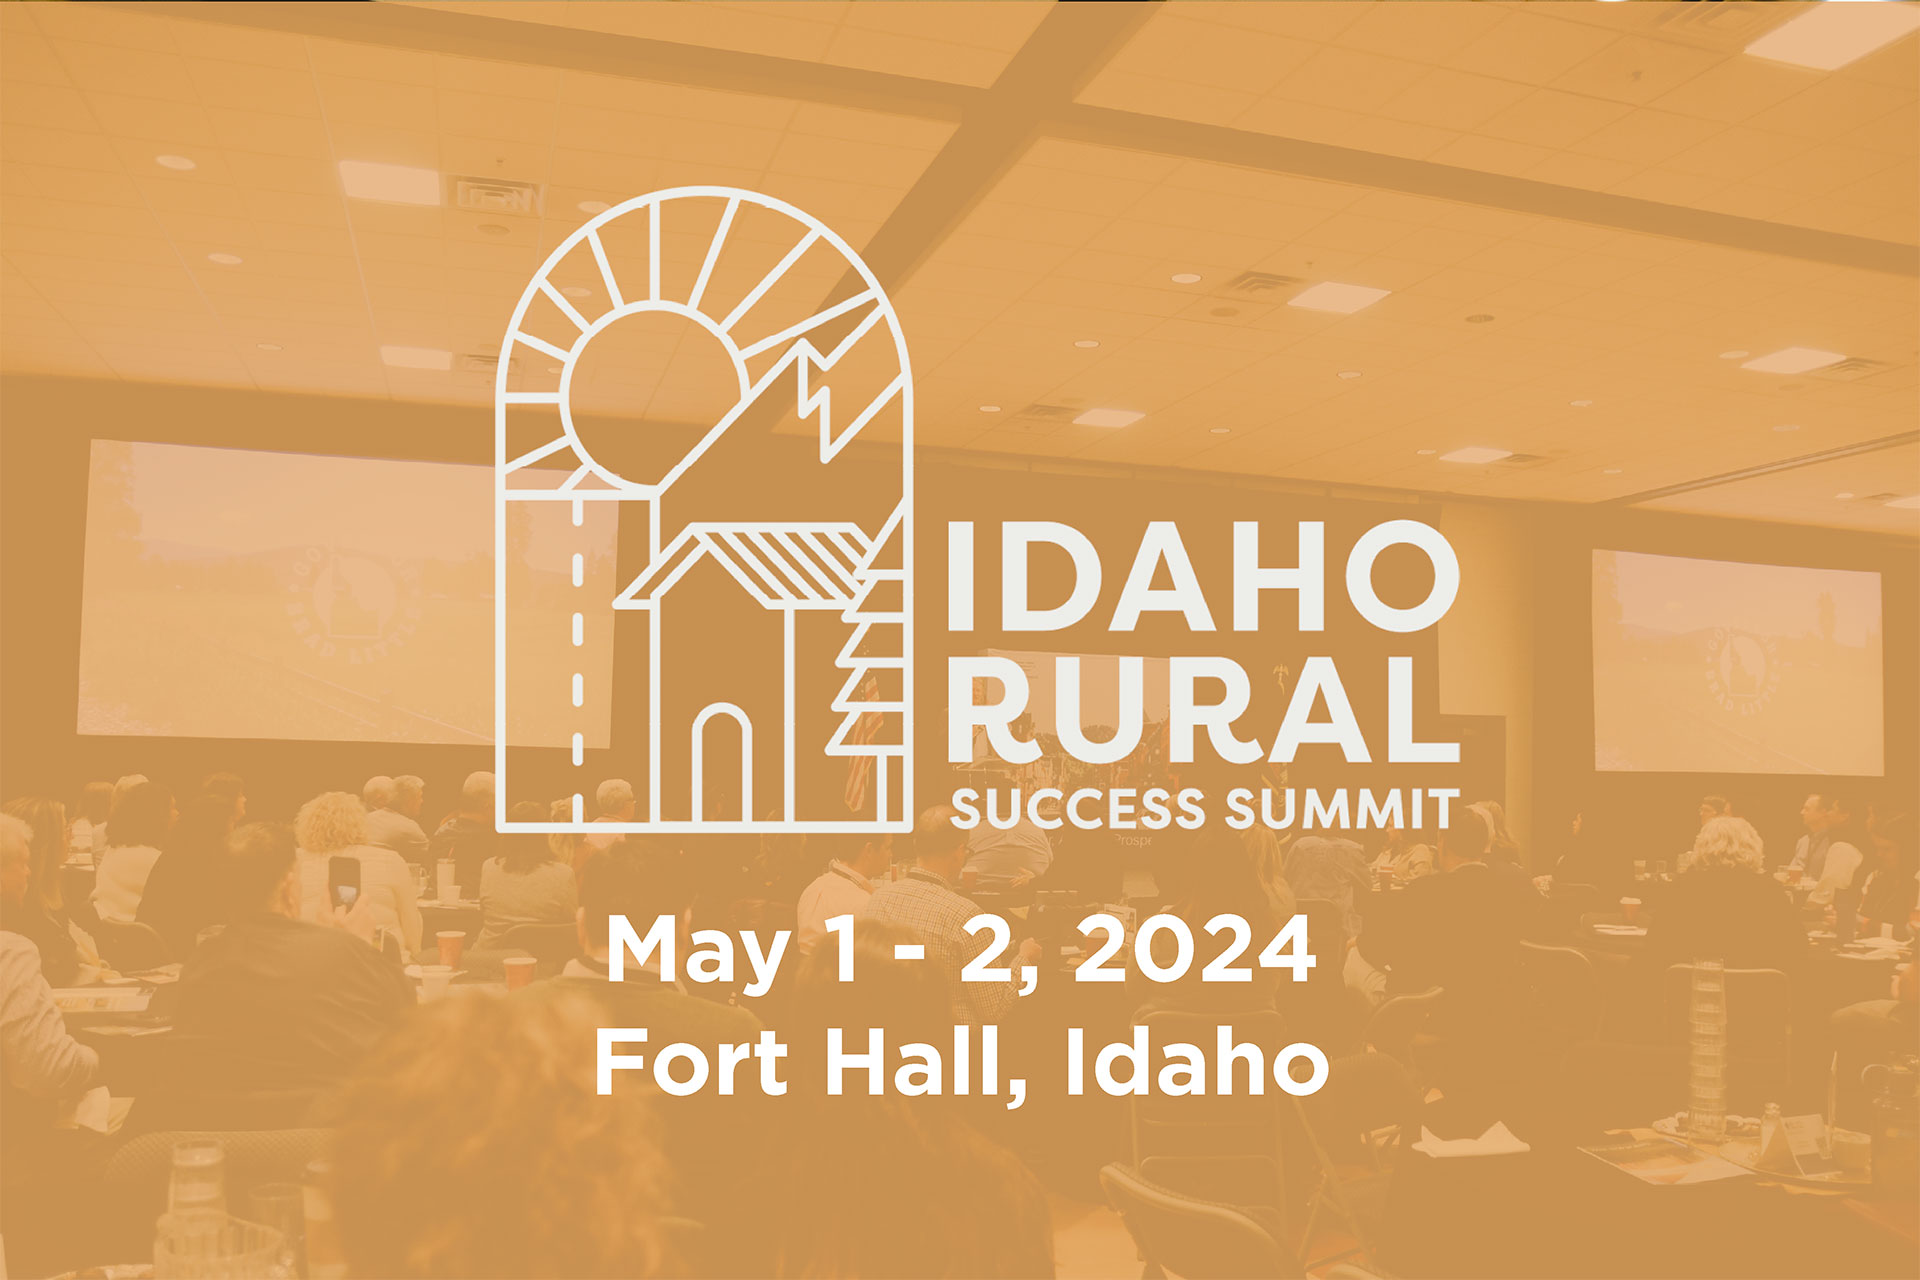 Group of people attending a previous Idaho Rural Success Summit